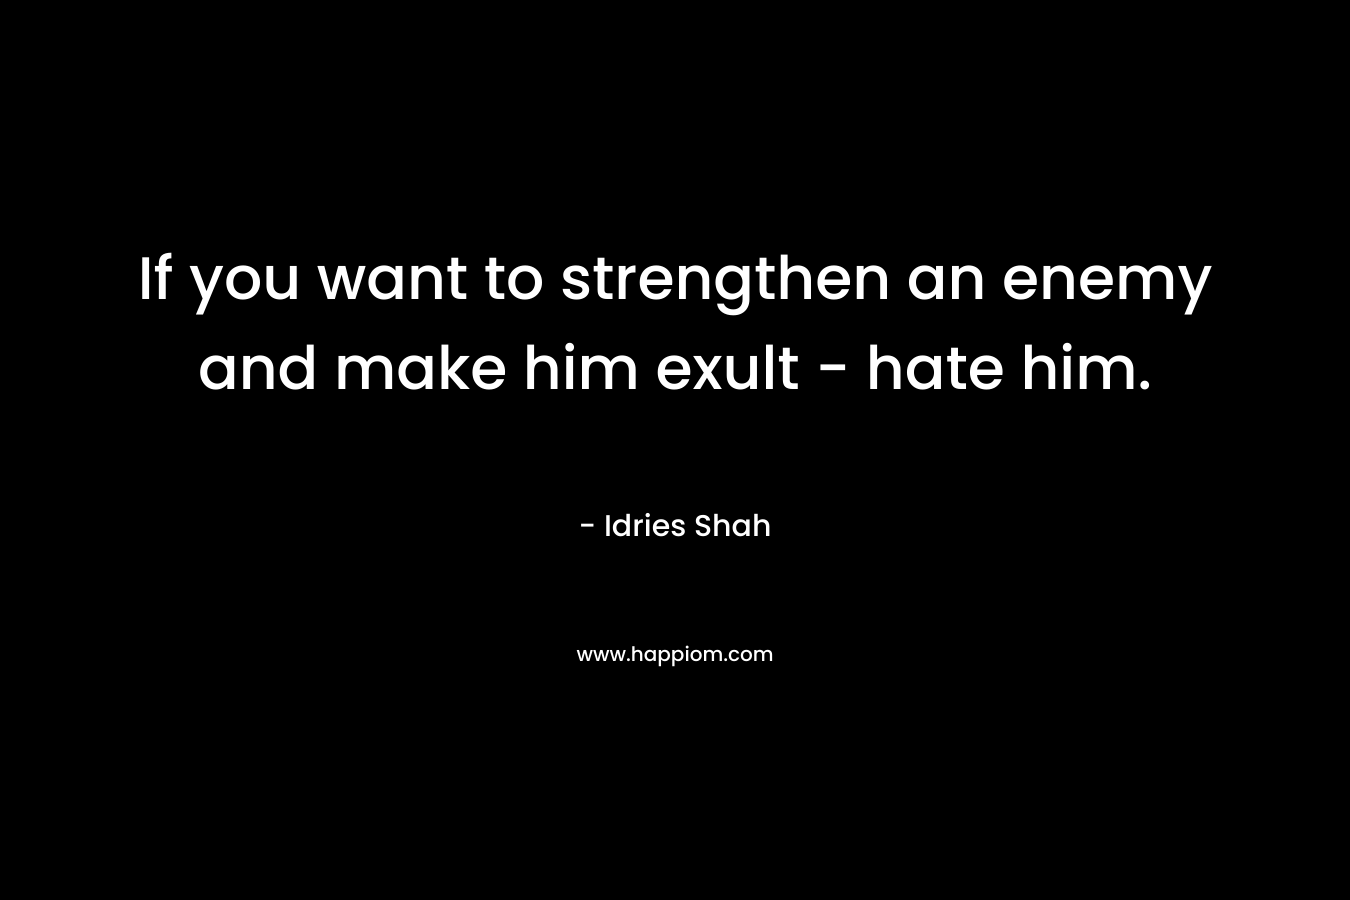 If you want to strengthen an enemy and make him exult - hate him.